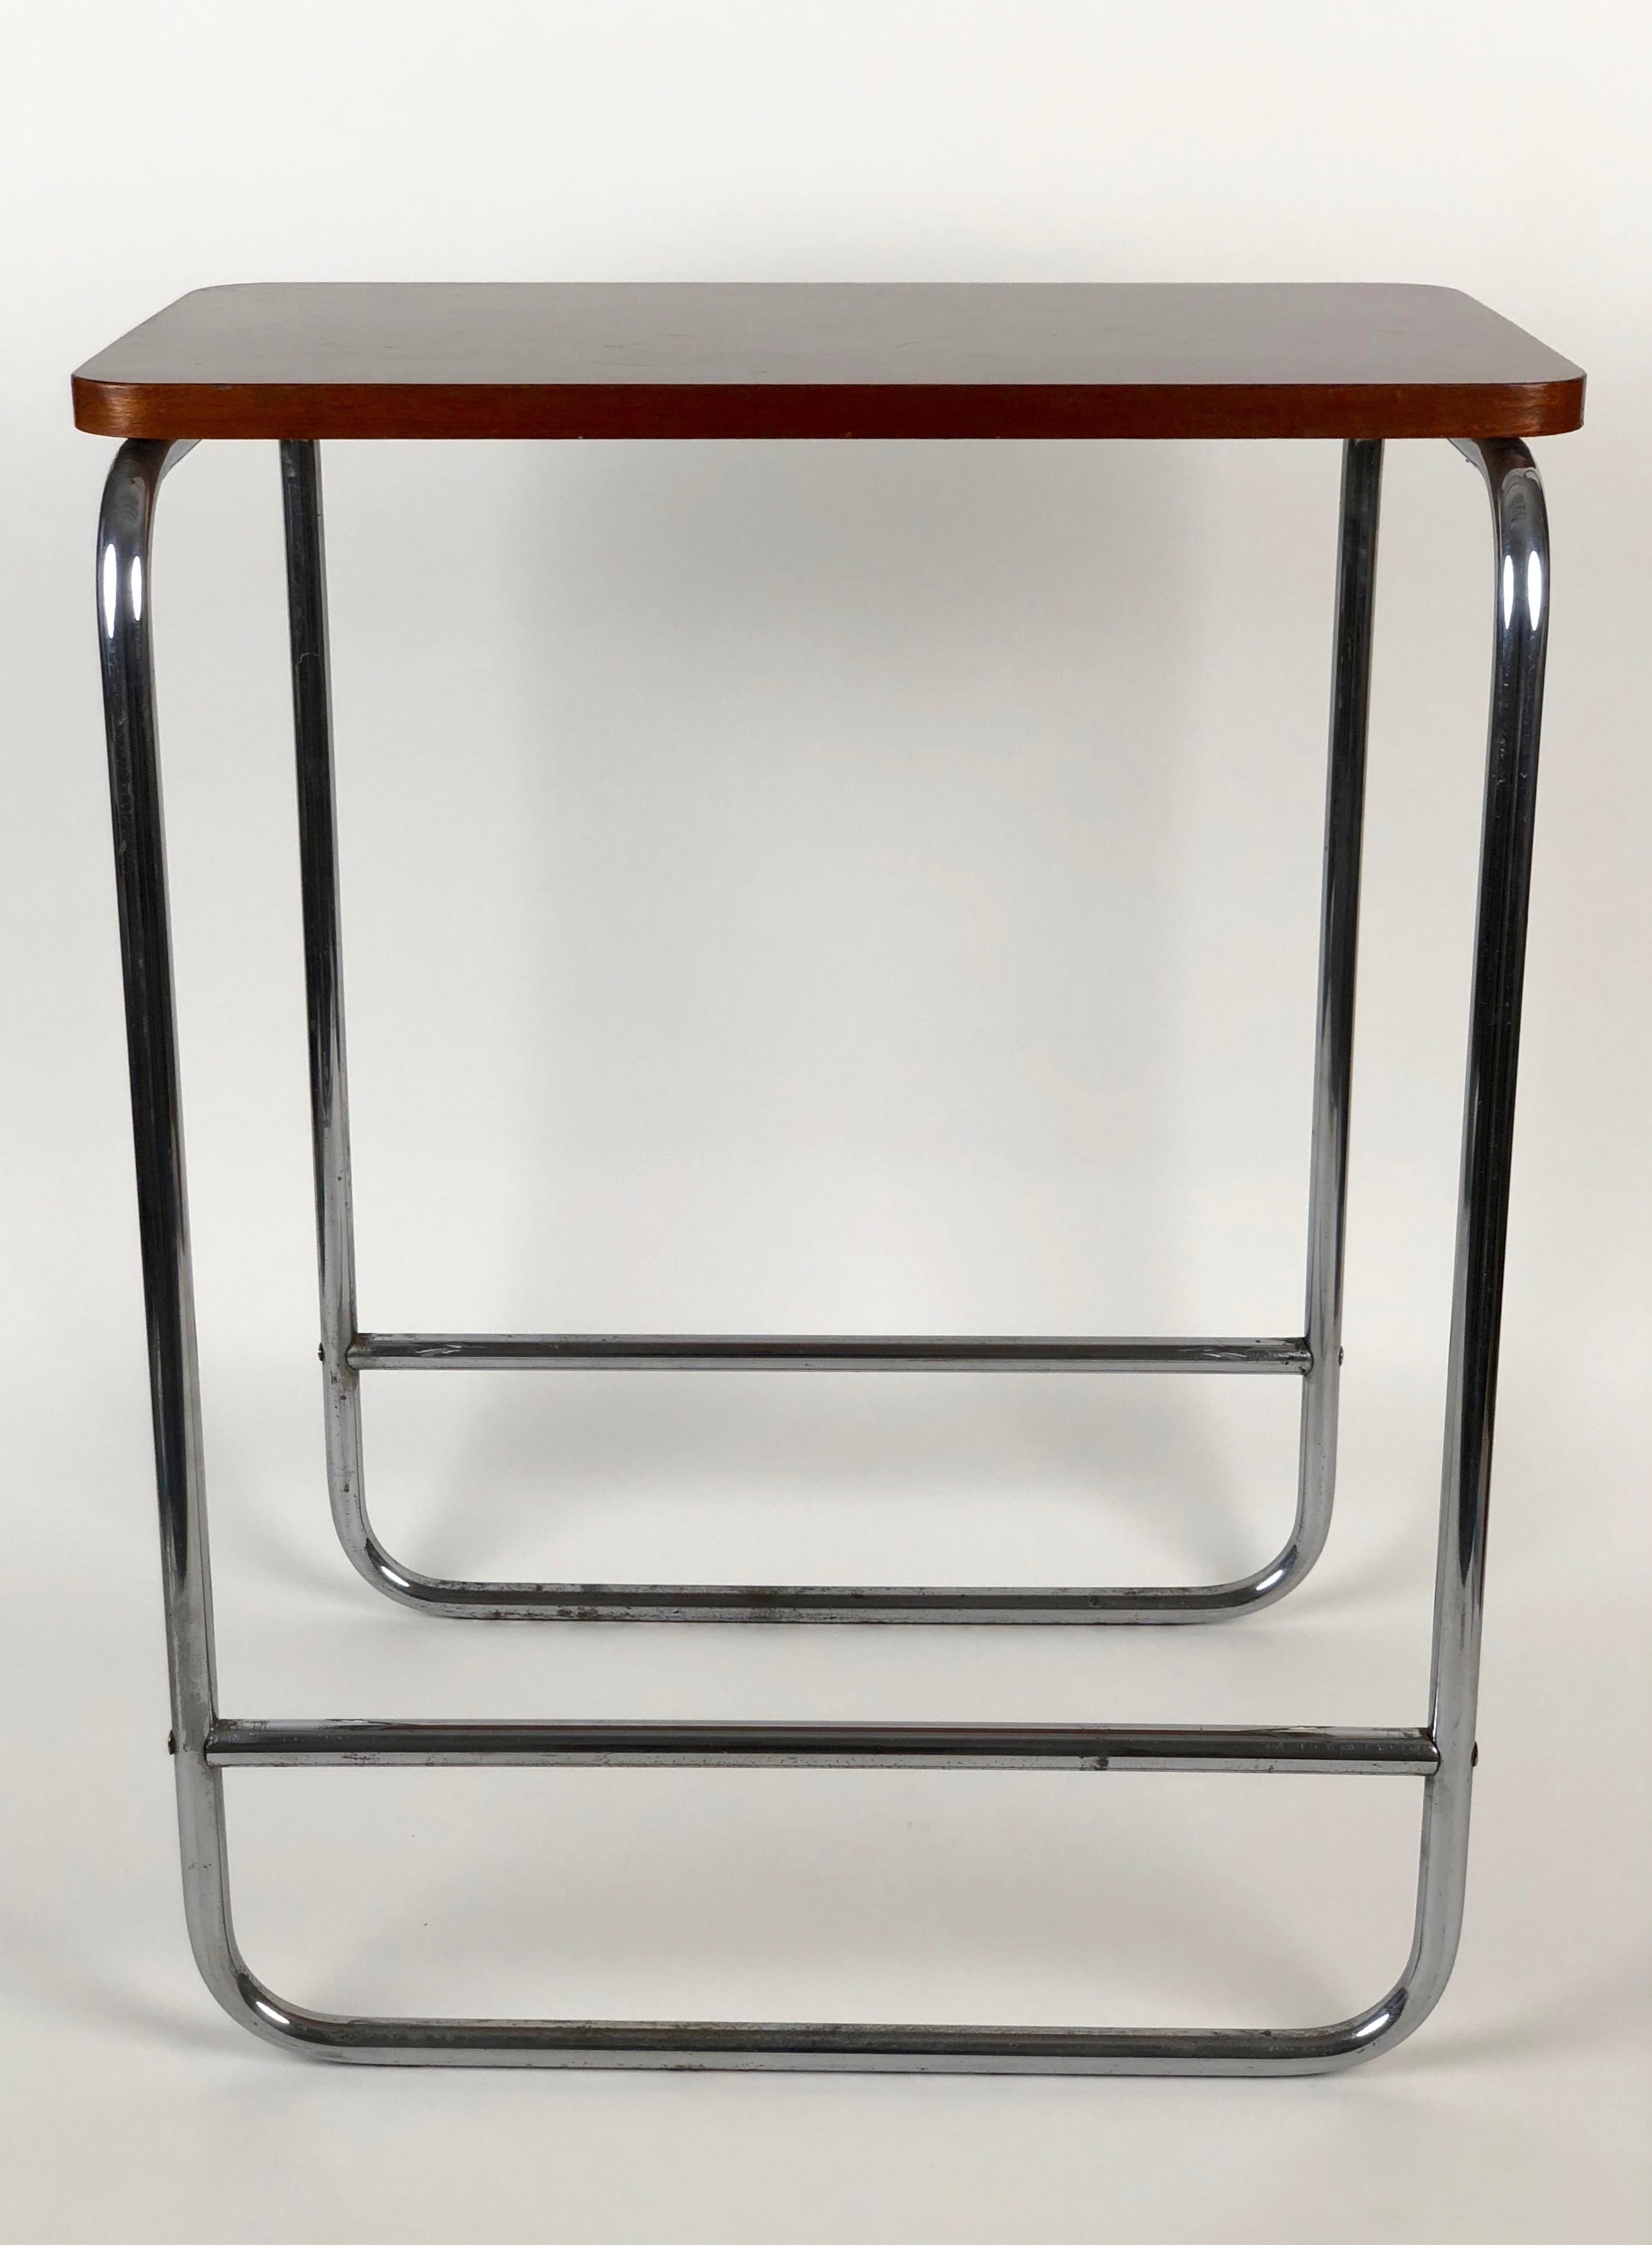 Plated Bauhaus Table with Bakelite Tabletop, from the 1930s, Czech Republic For Sale